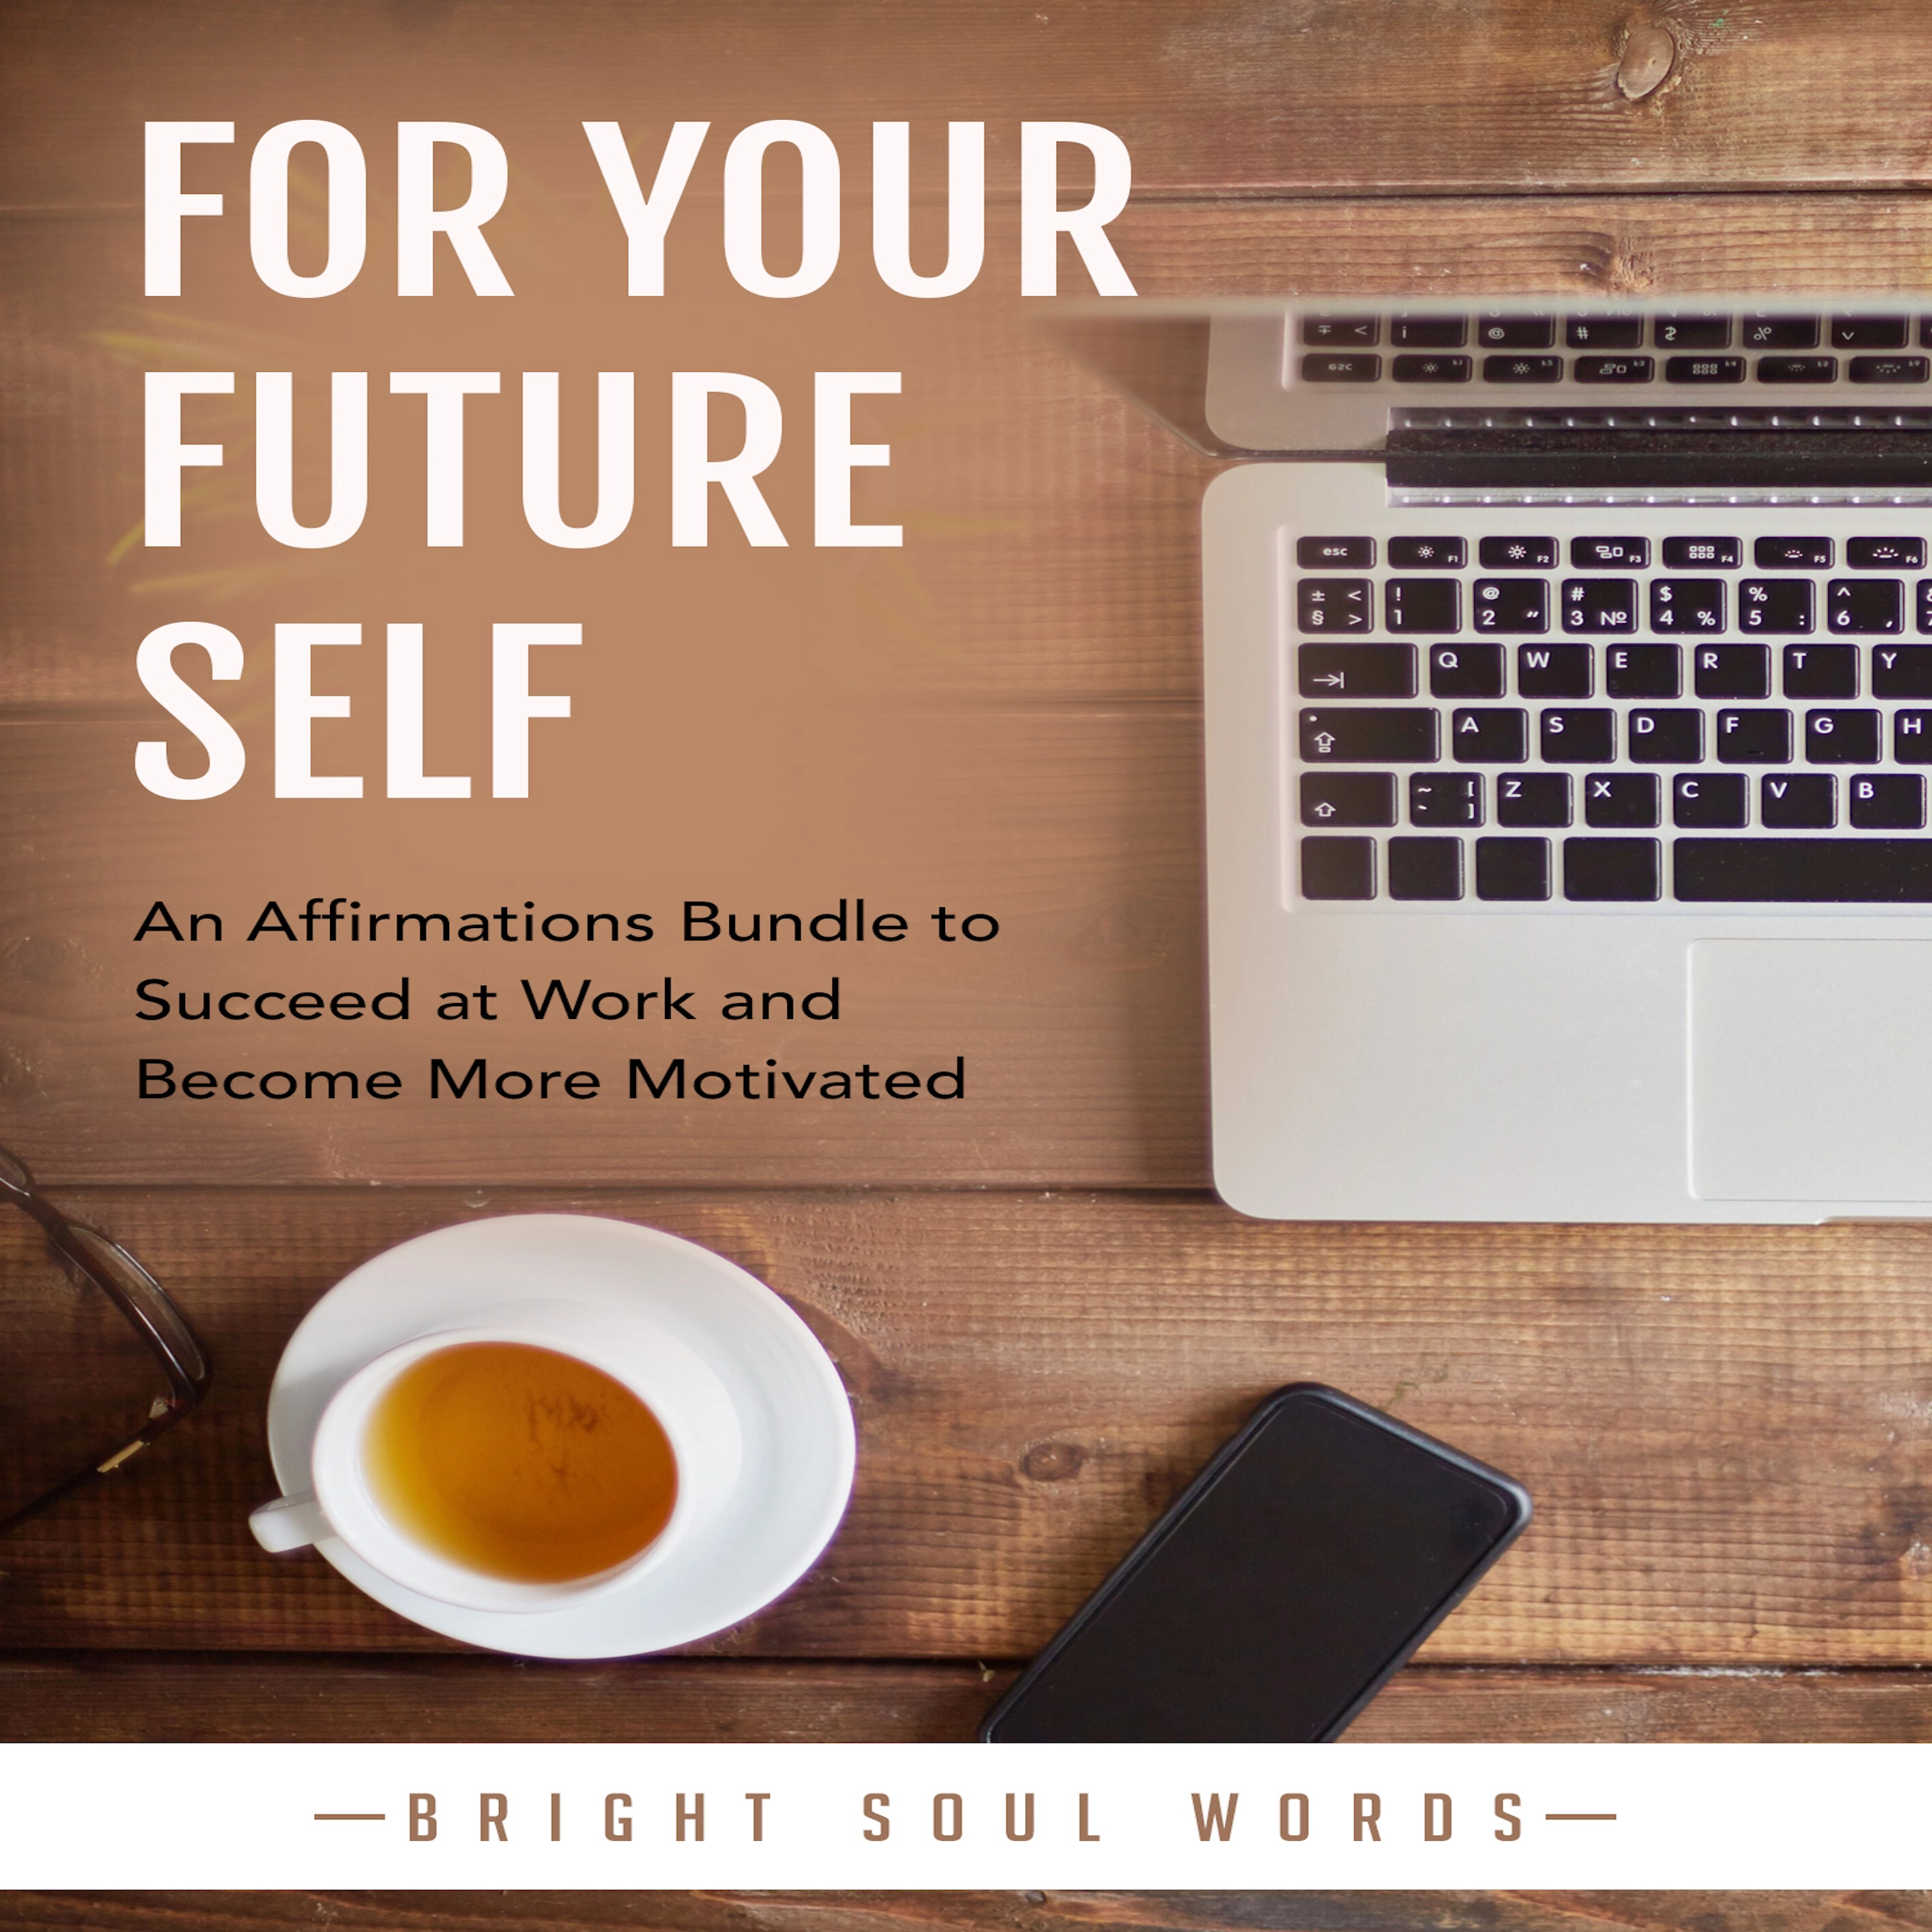 For Your Future Self: An Affirmations Bundle to Succeed at Work and Become More Motivated Audiobook by Bright Soul Words